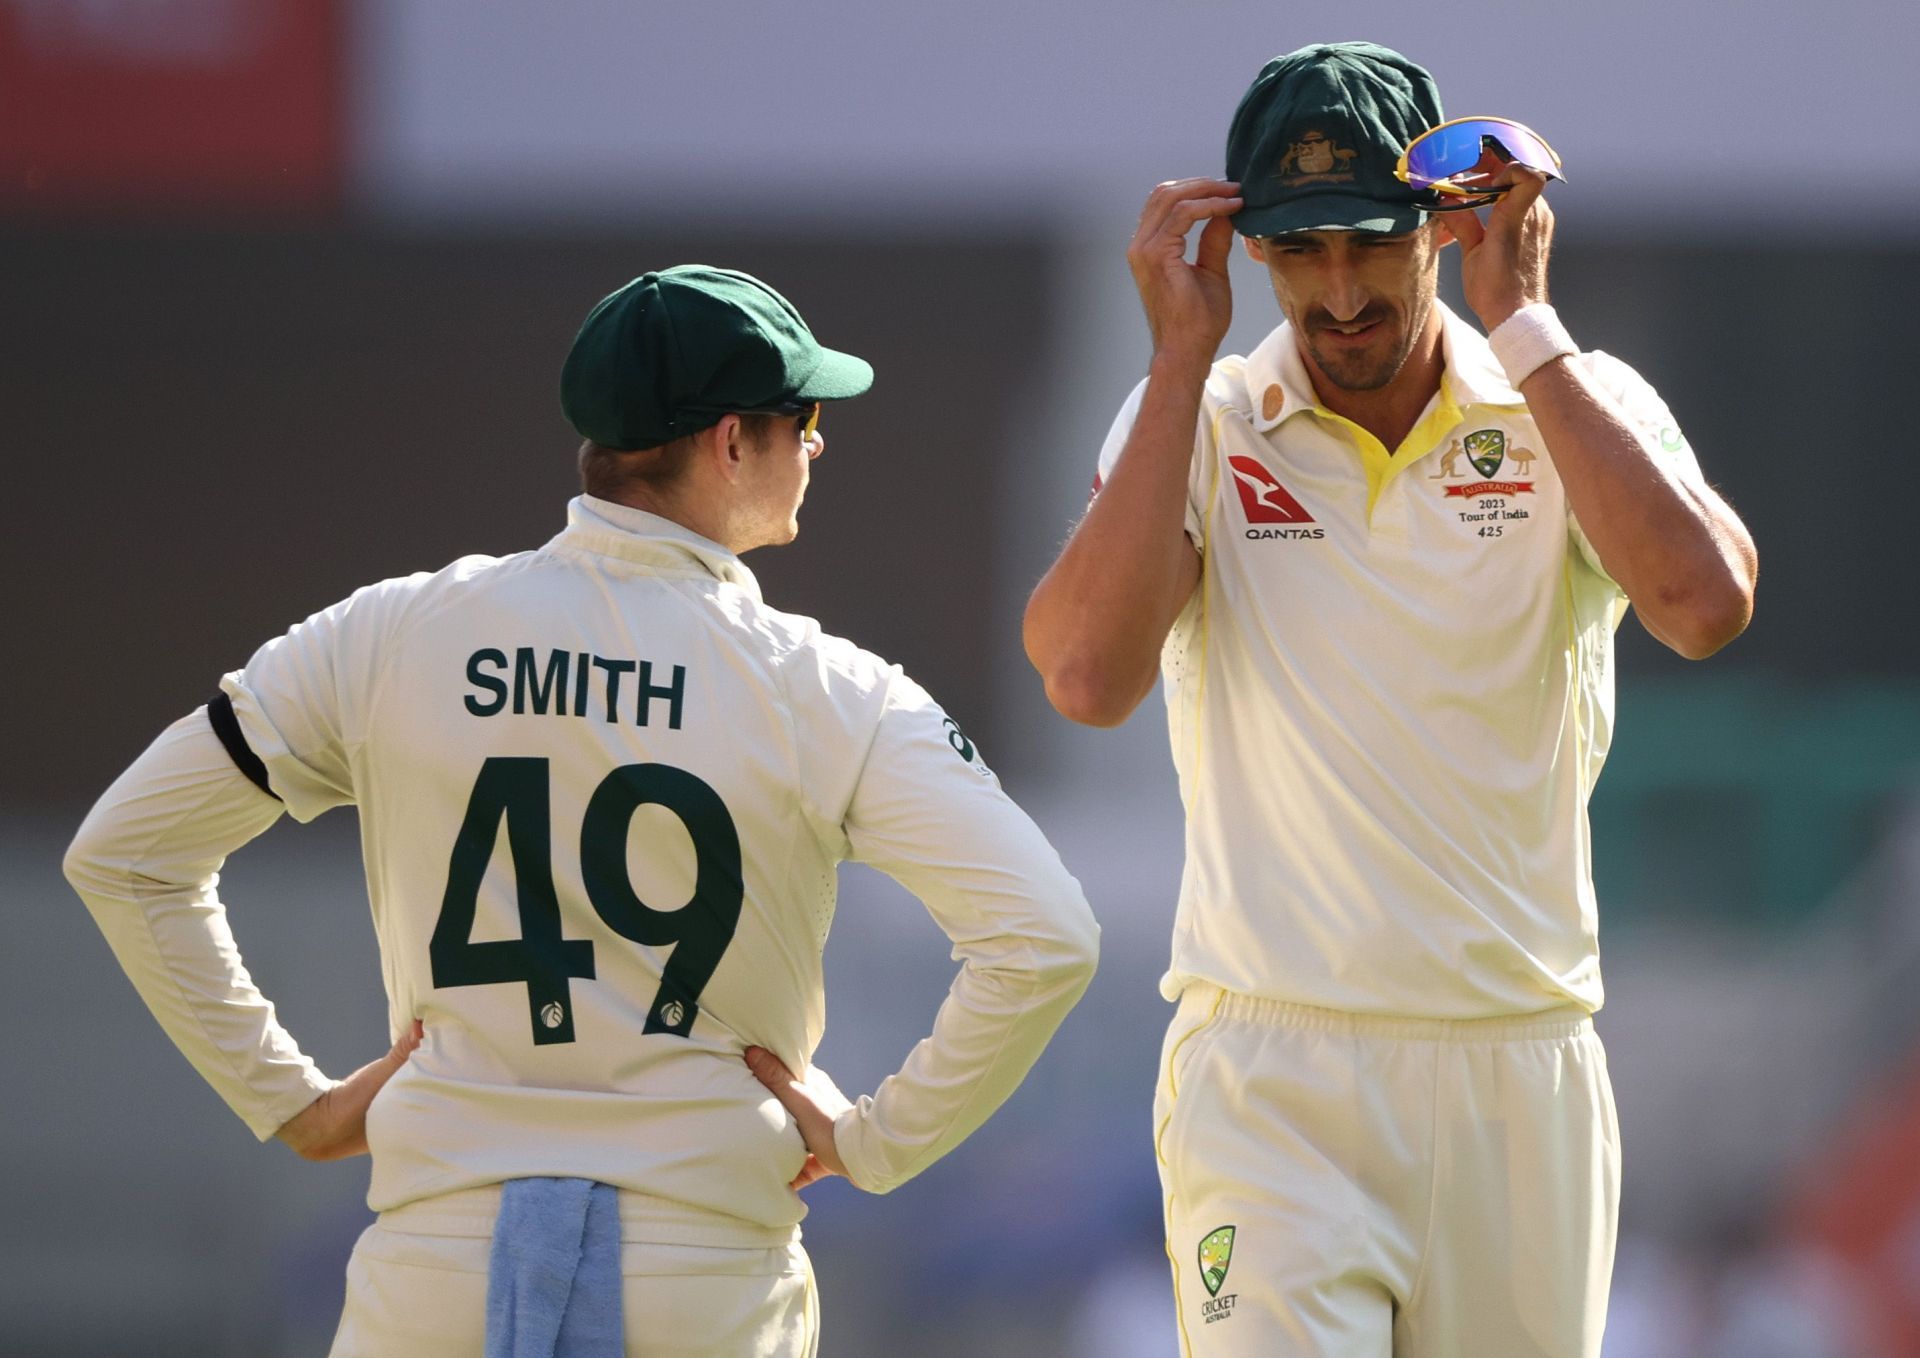 Mitchell Starc does not have a great Test record against India. (Pic: Getty Images)